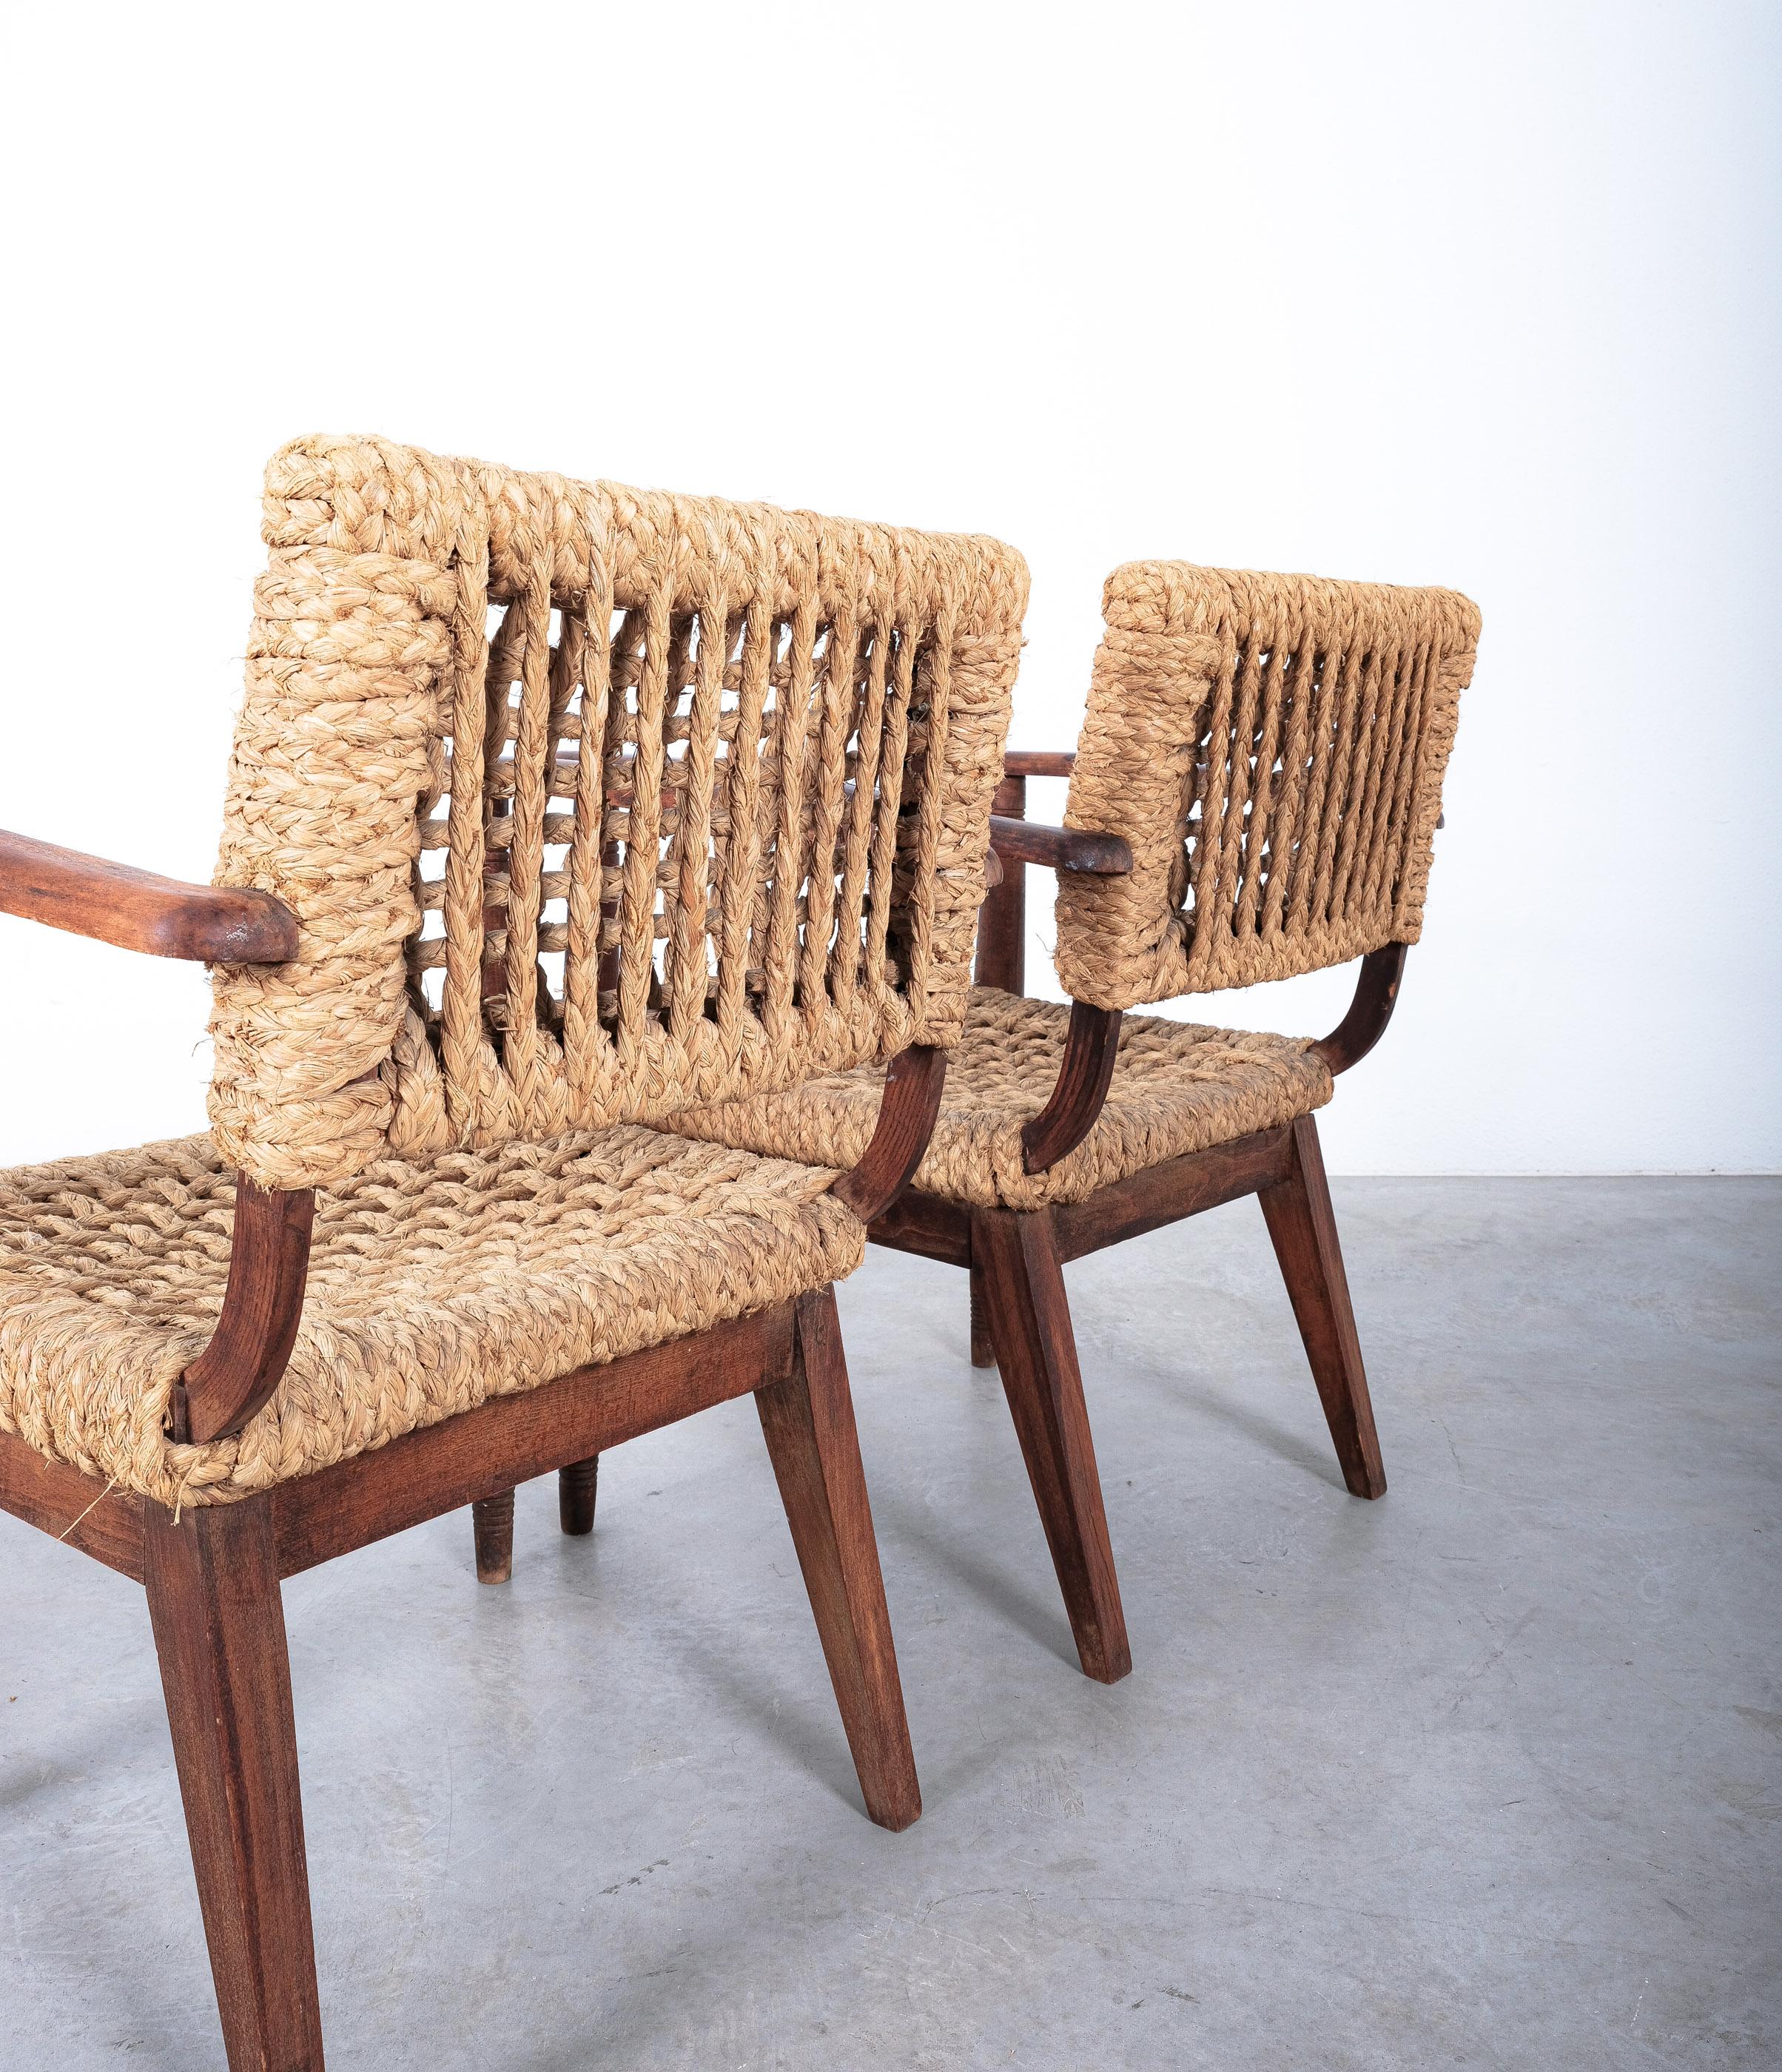 French Pair of Rope Lounge Chairs by Adrien Audoux and Frida Minet, France, 1950